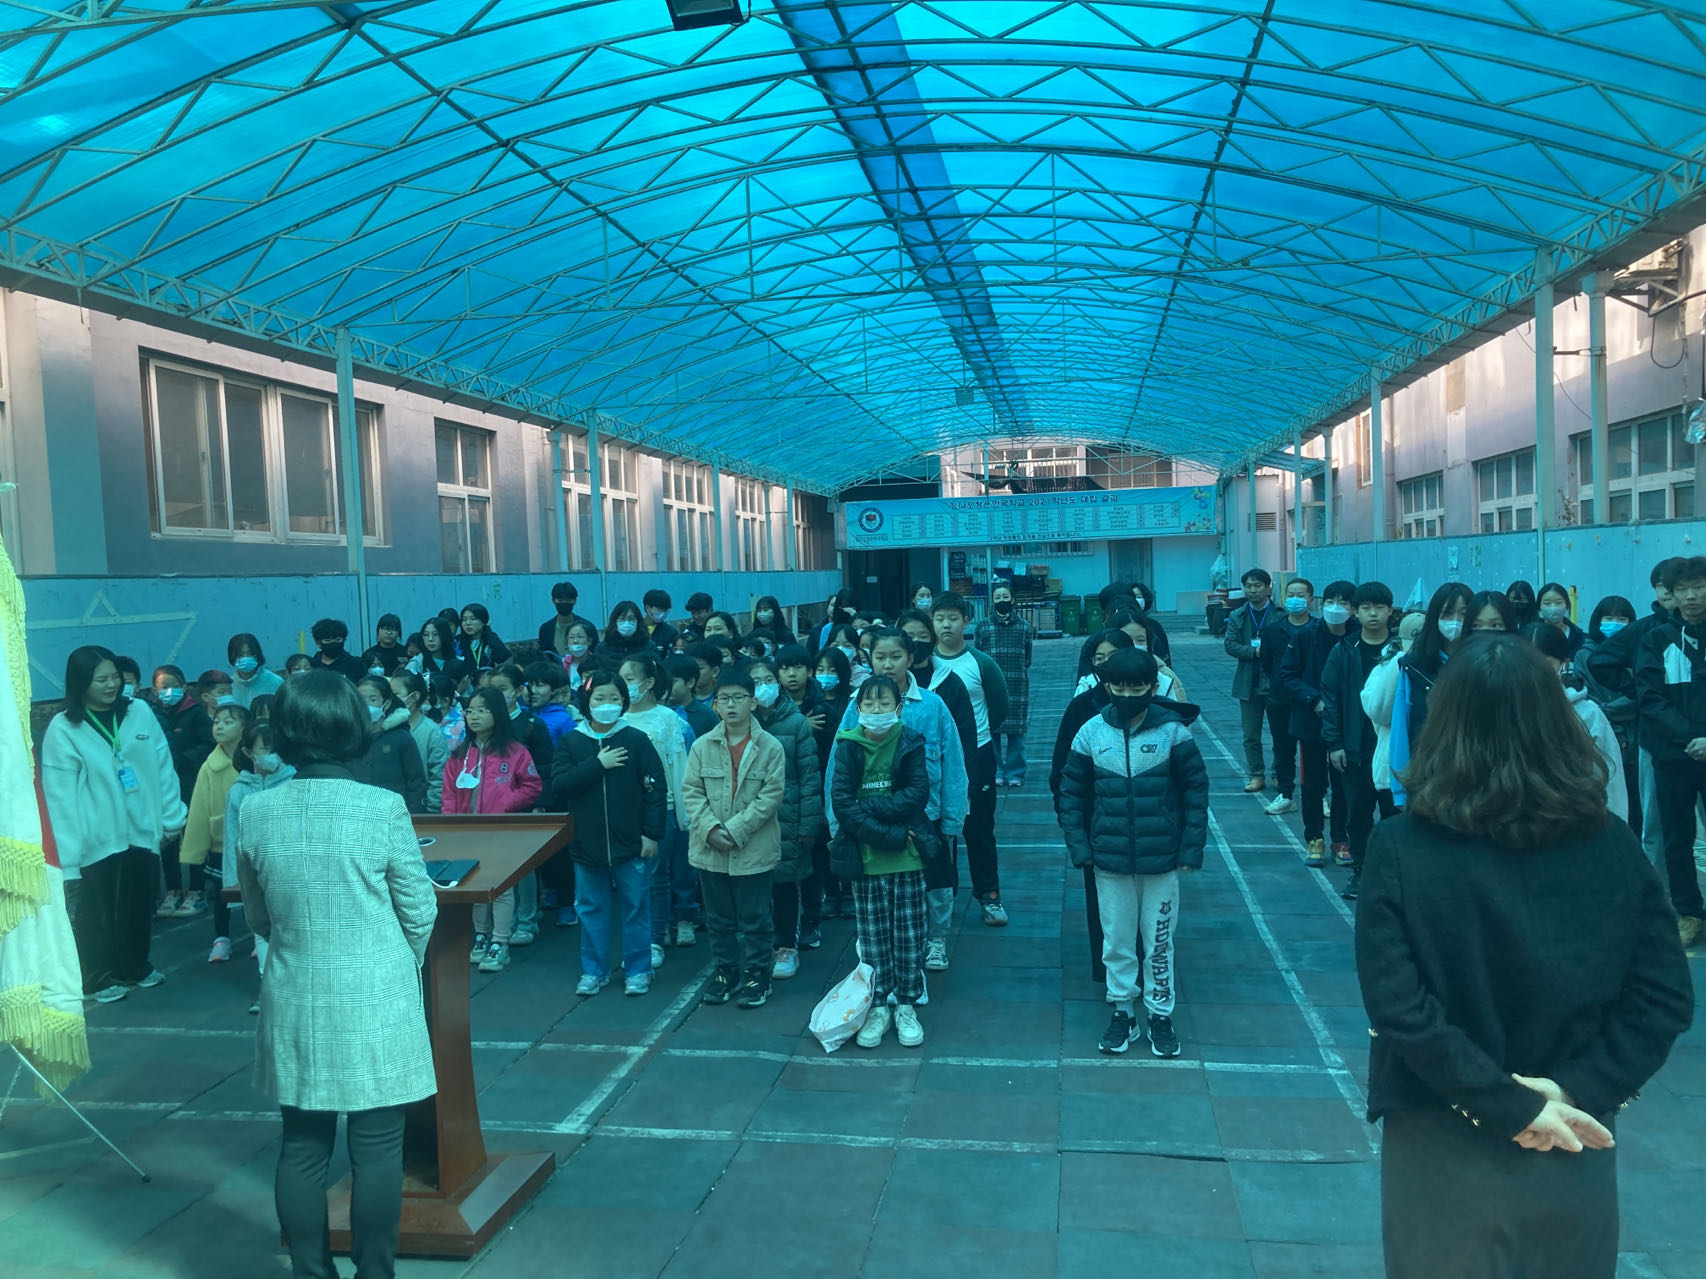 Faculty members and students convene for the first morning assembly of March of the Hangeul School in Qingdao